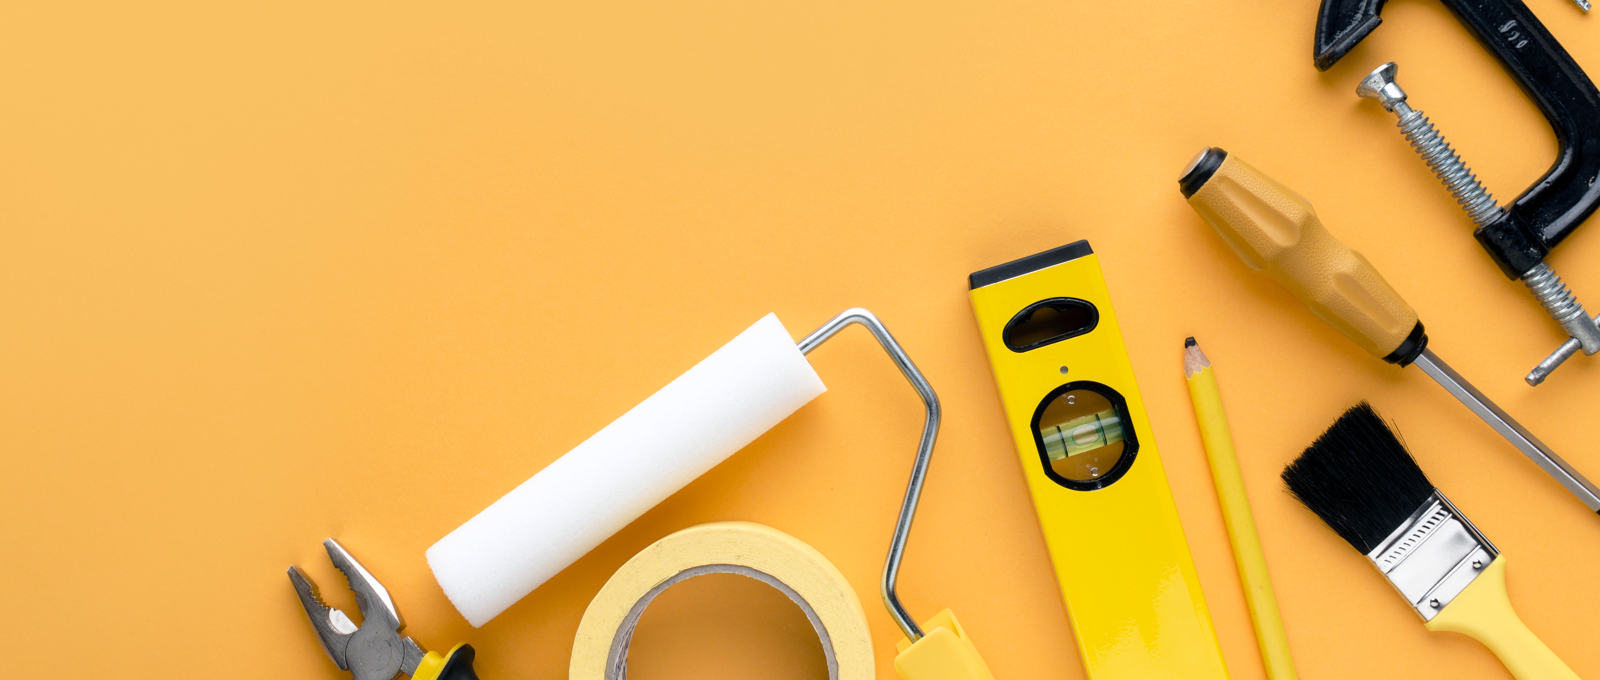 Photo of various DIY tools arranged on a dark yellow surface